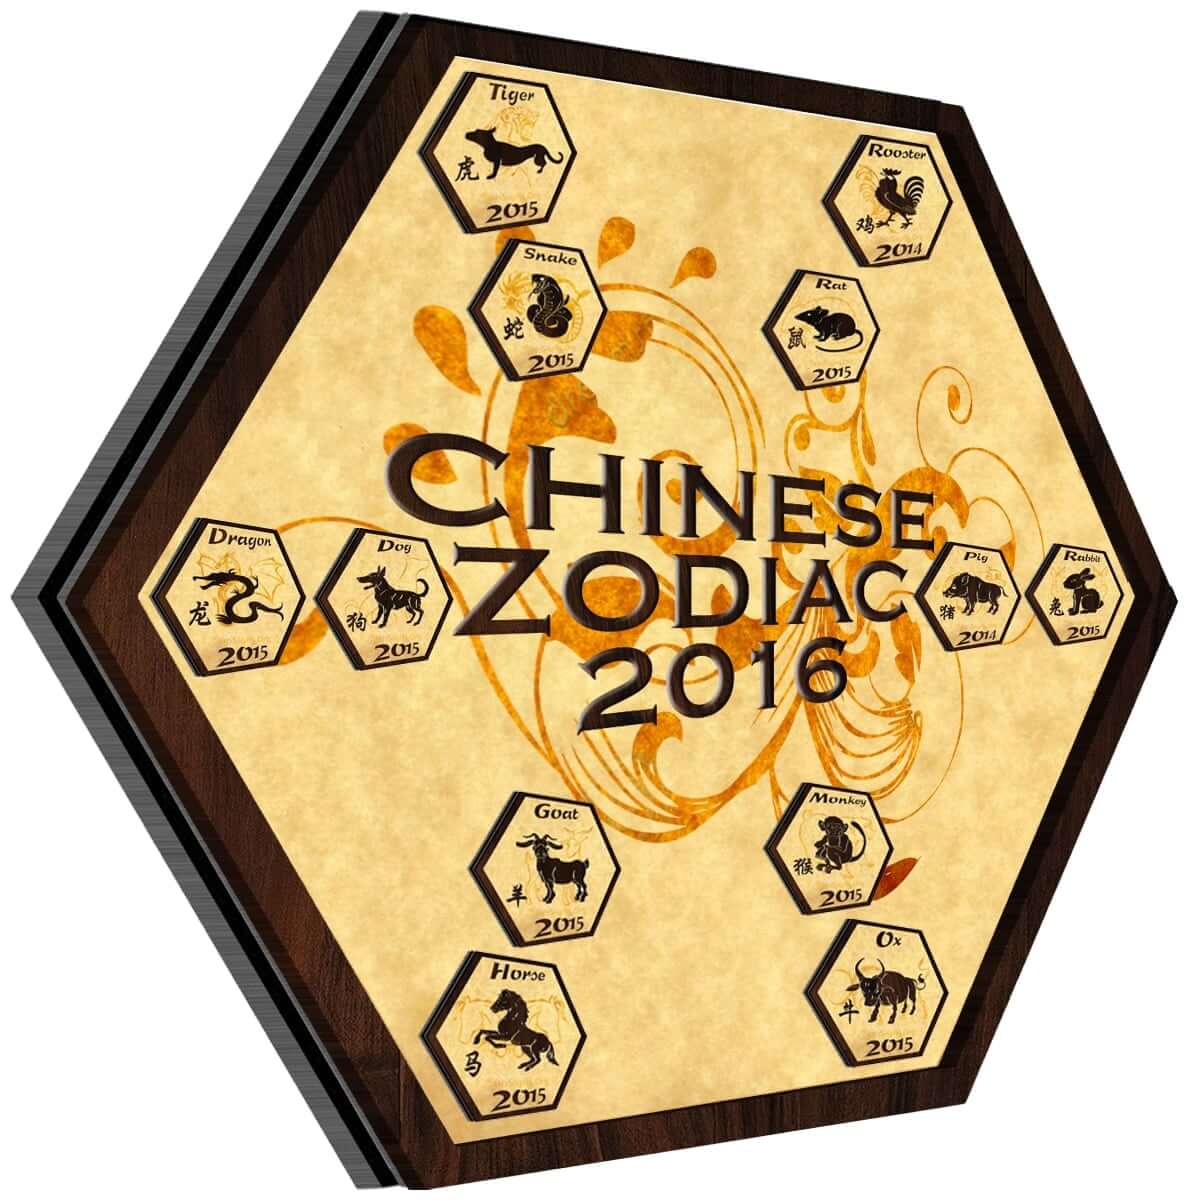 Chinese Zodiac 2016 Infographic | Sun Signs1200 x 1200